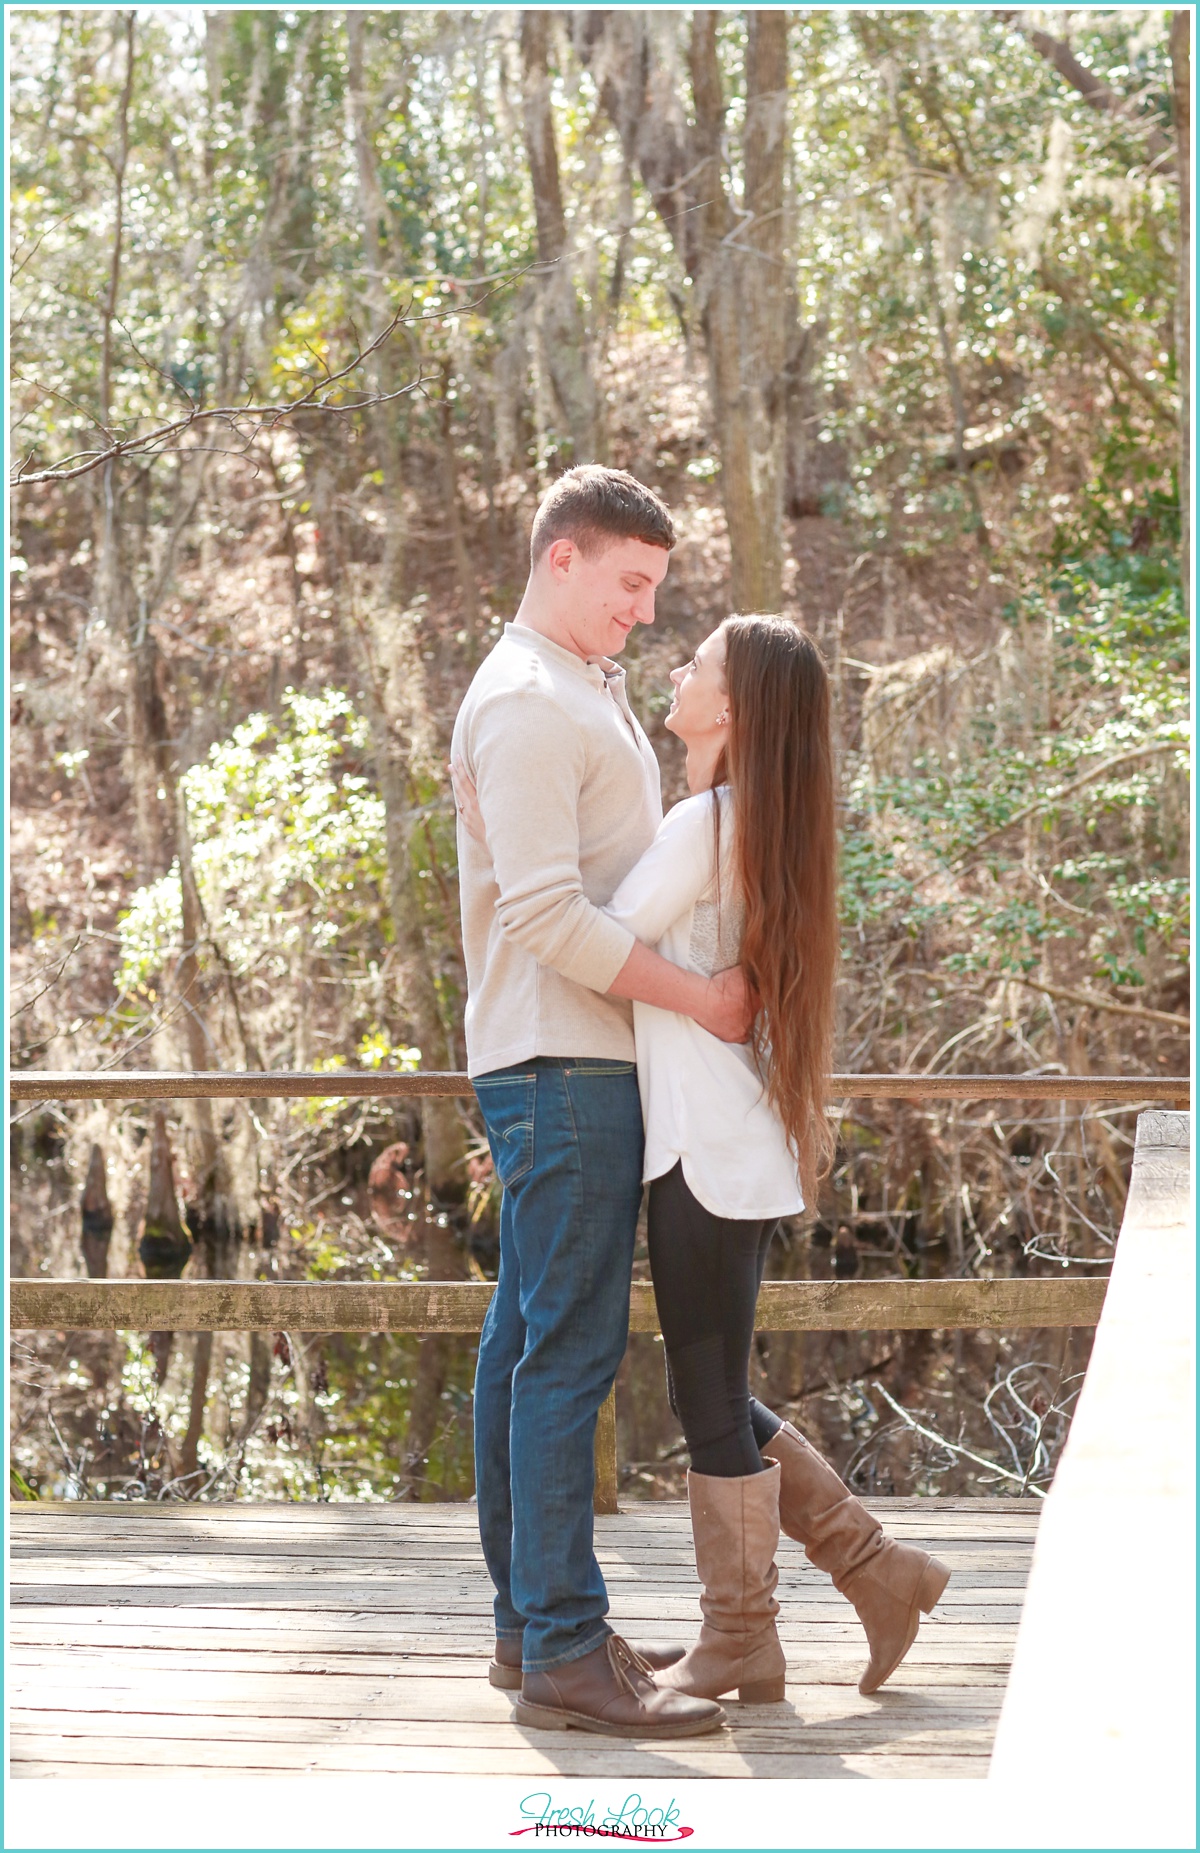 Outdoorsy engagement session